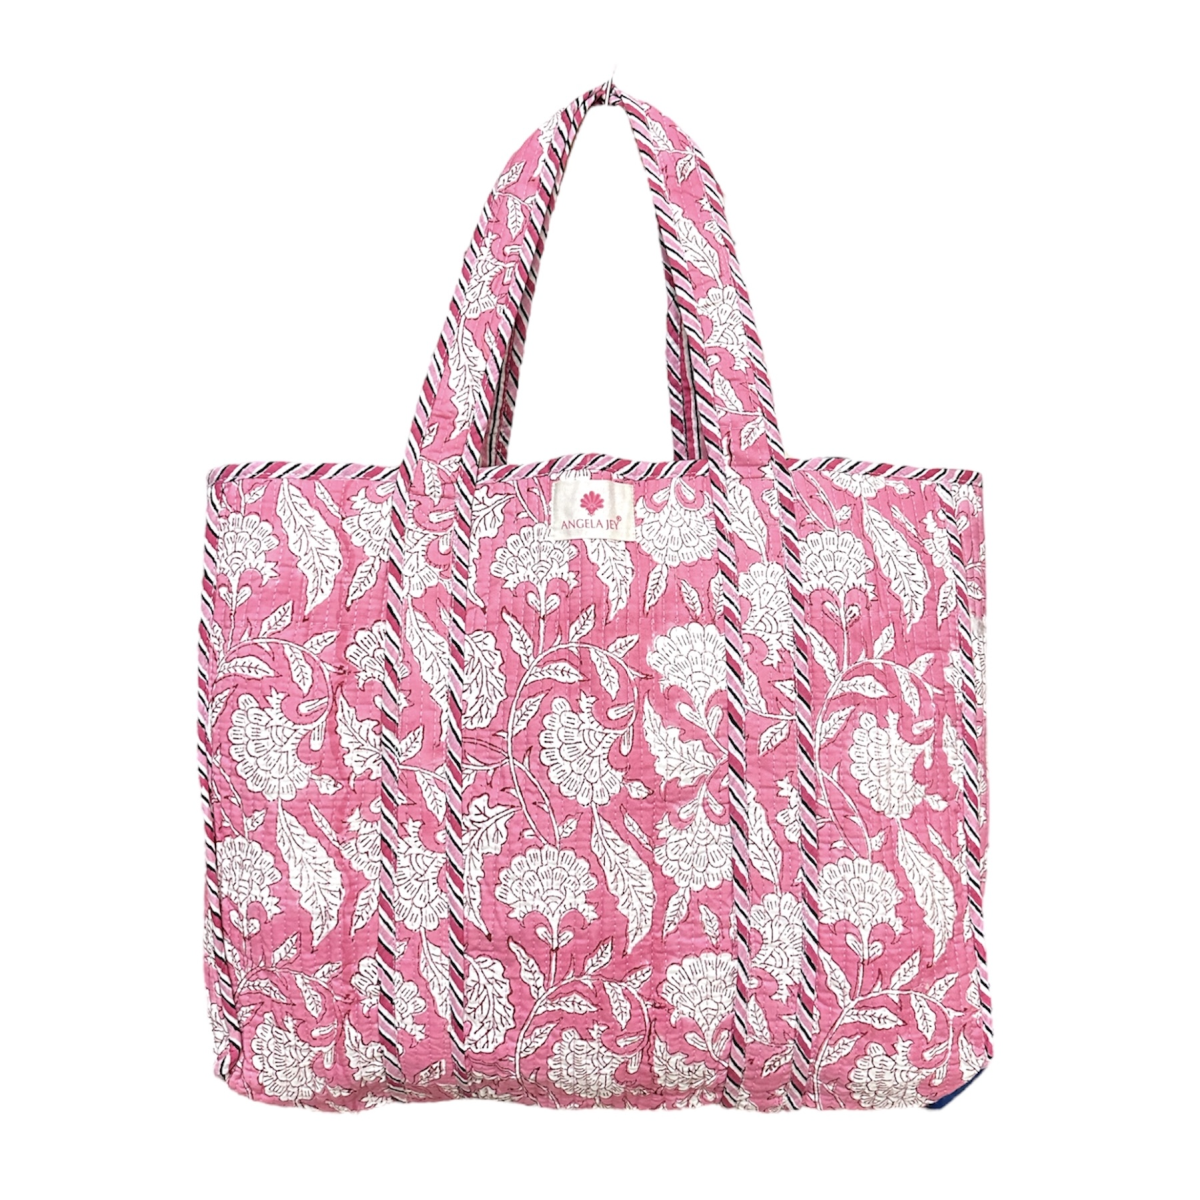 Block Printed Cotton Quilted Bag - Sea Pink 